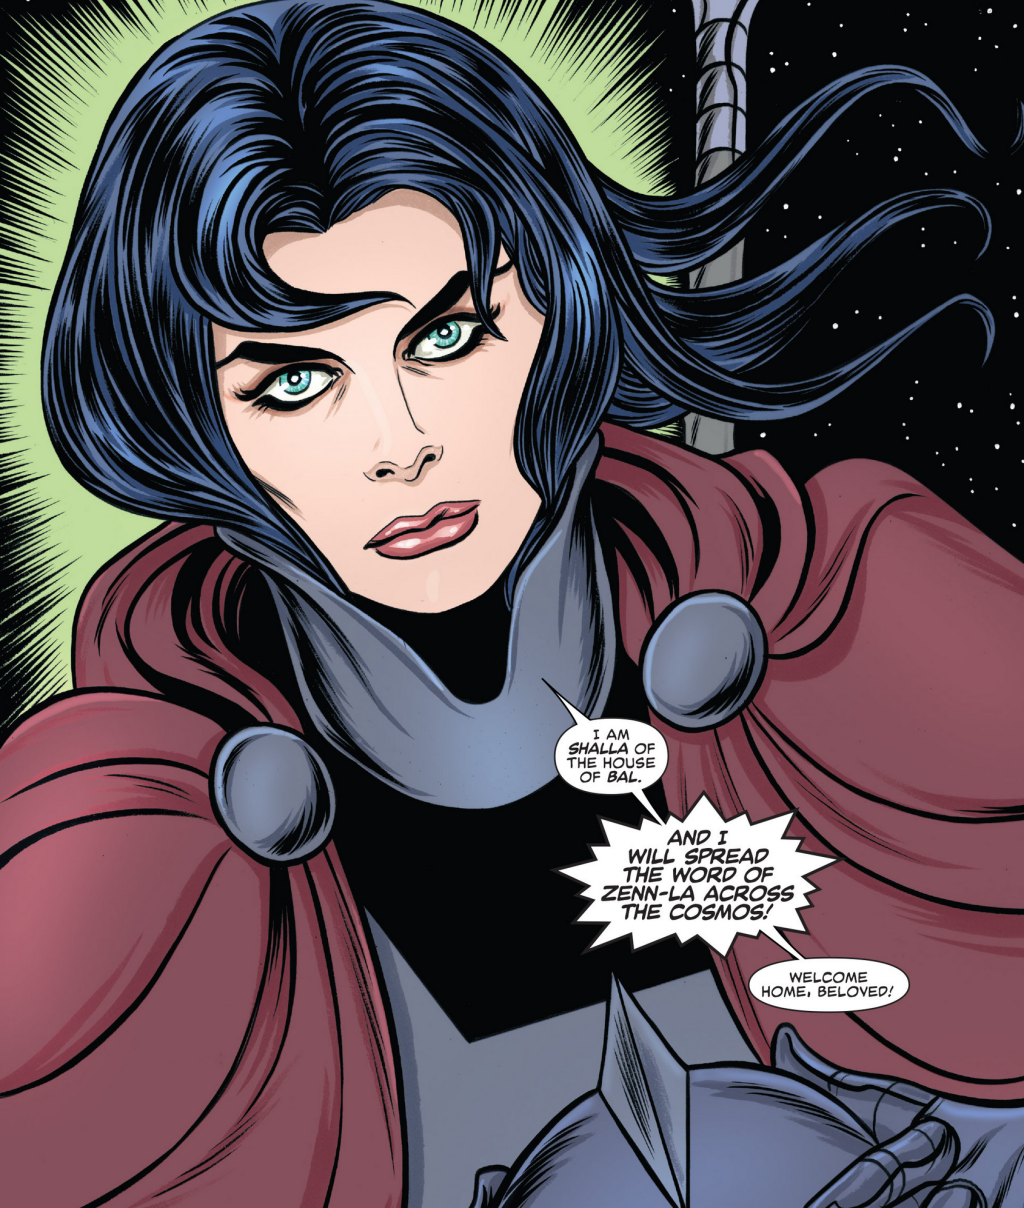 Shalla-Bal reveals herself as the Keeper of the Great Truth in Silver Surfer Vol. 8 #2 "Things Change" (2016), Marvel Comics. Words by Dan Slott, art by Mike Allred, Laura Allred, and Joe Sabino.